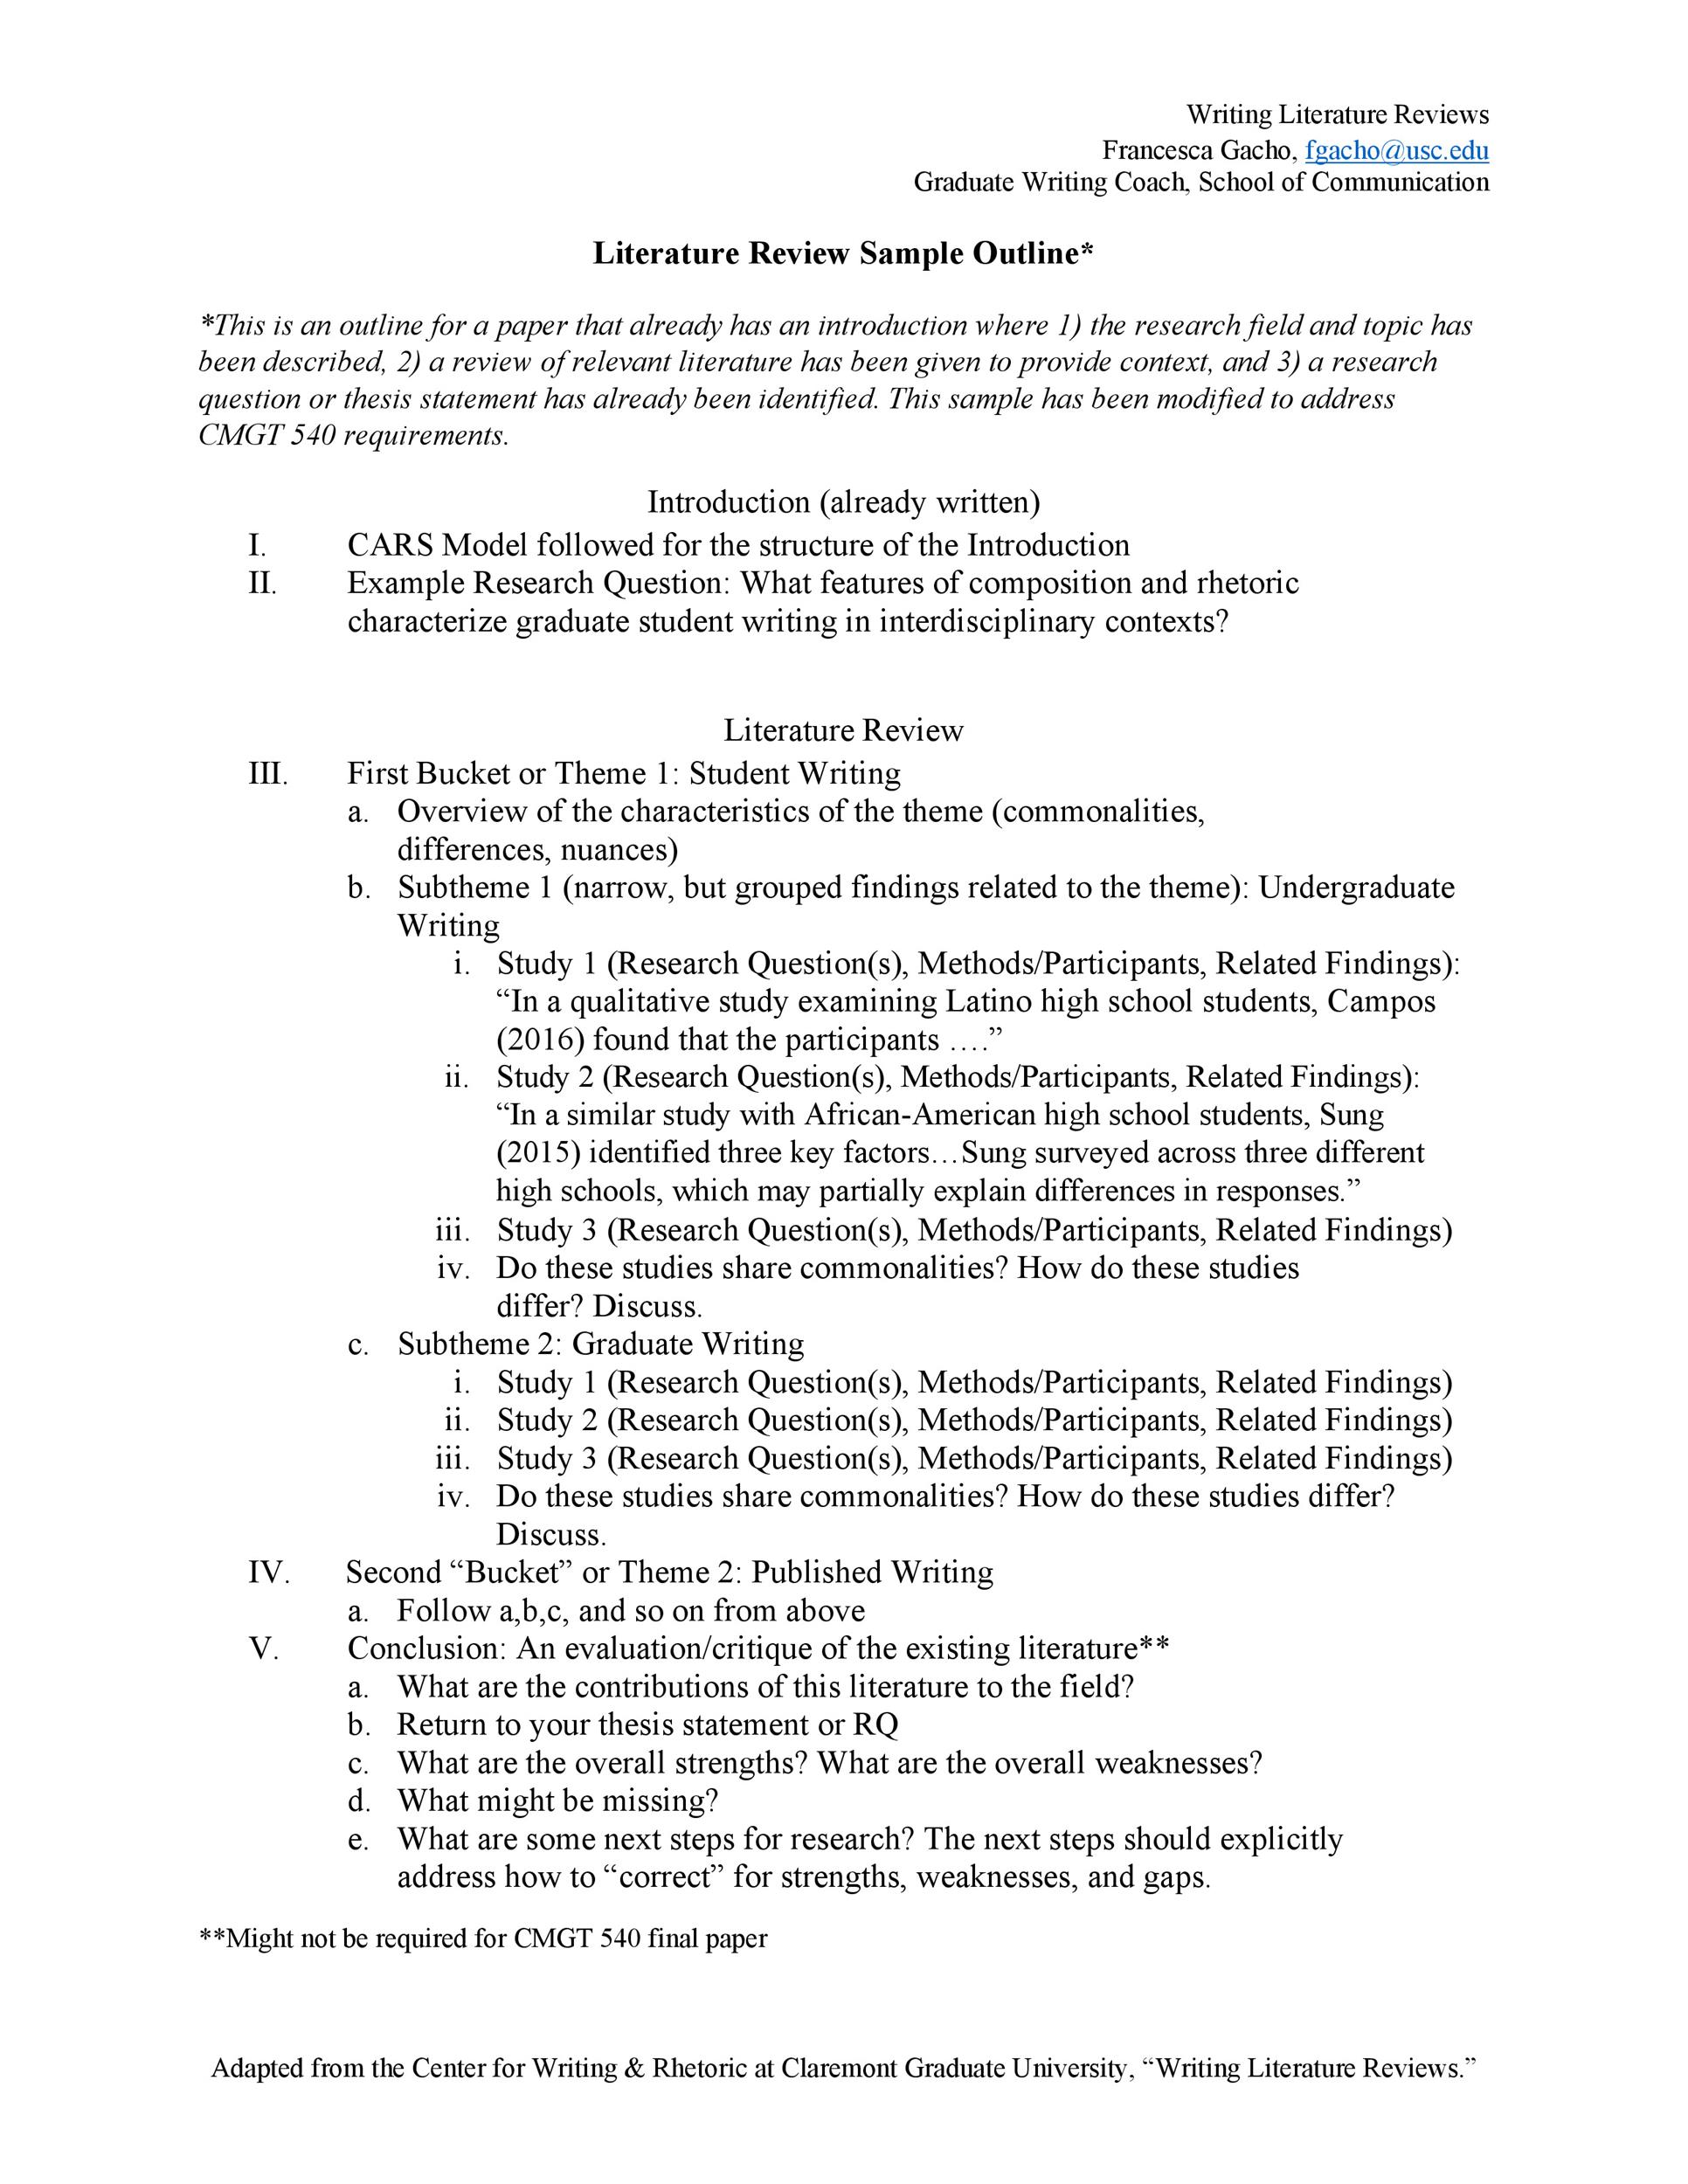 literature review outline sample apa